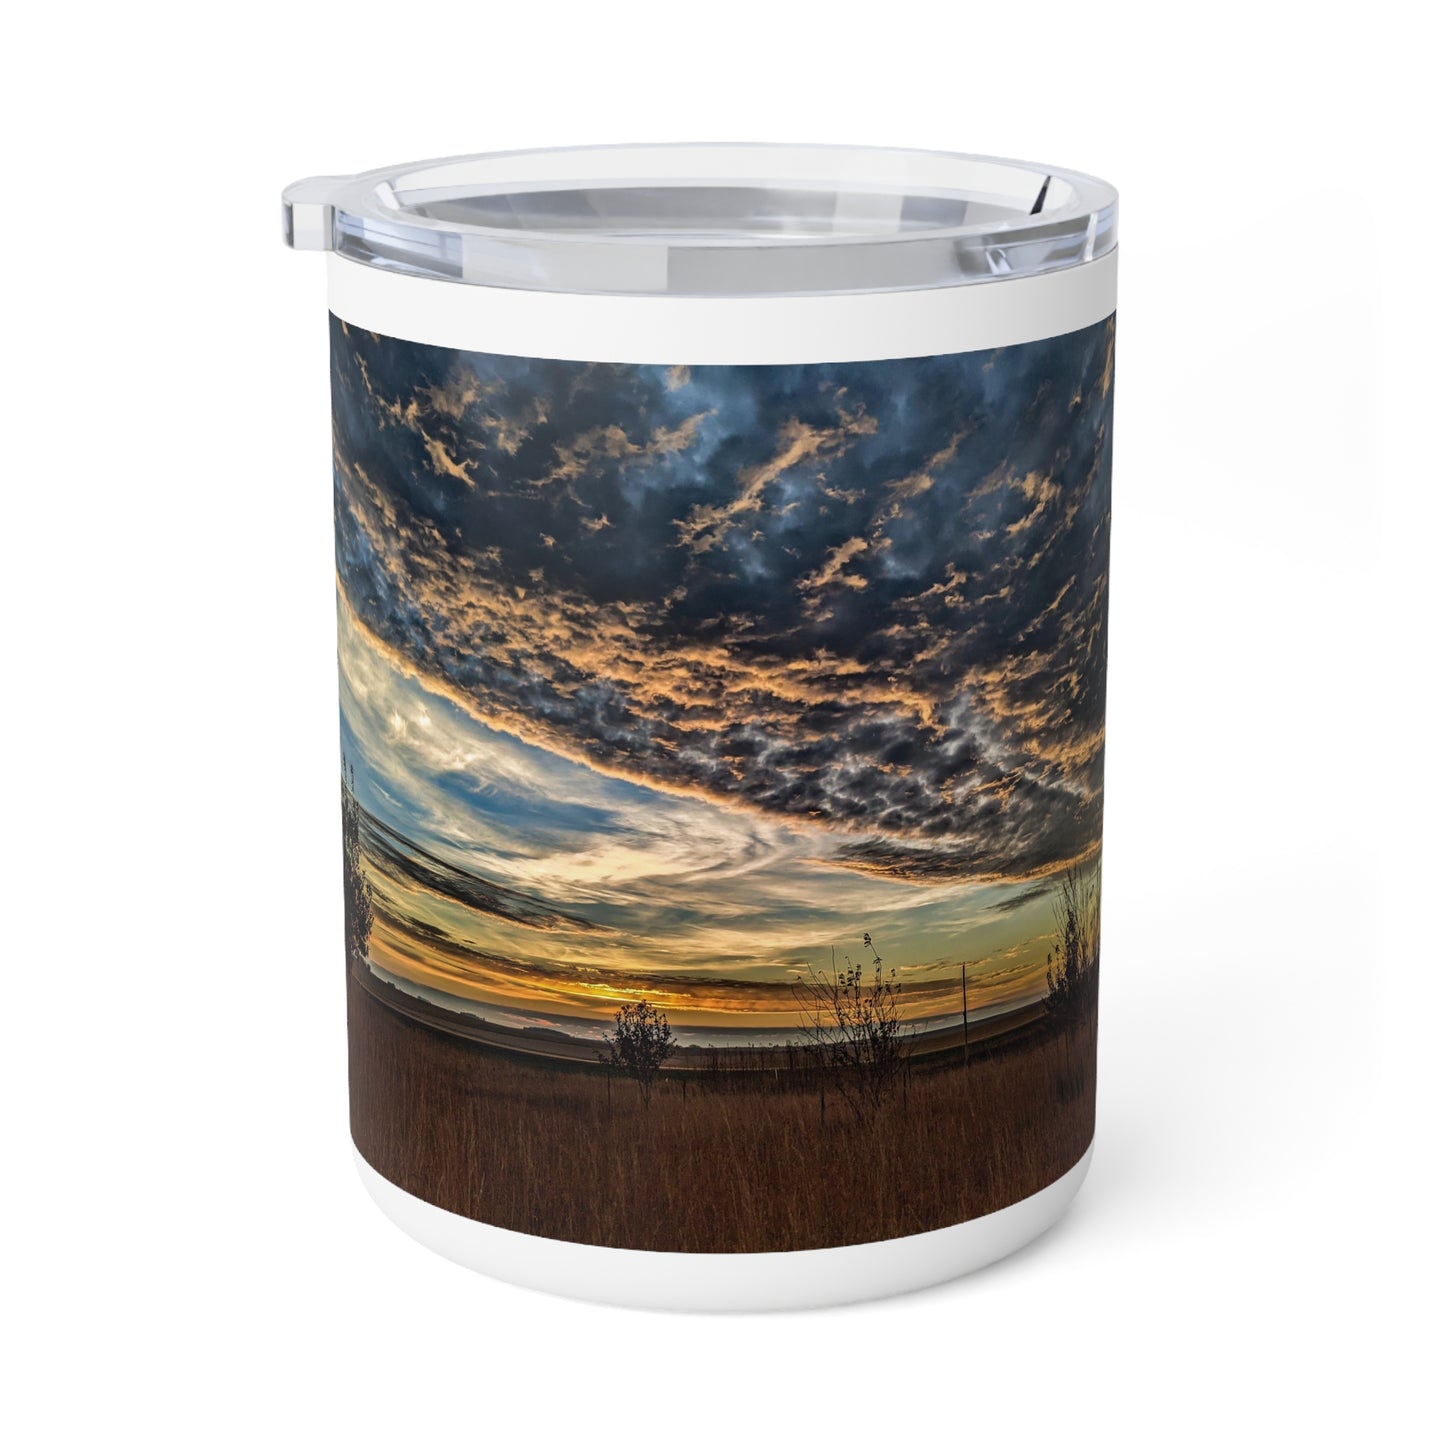 Sandy Skies Insulated Coffee Mug, 10oz (SP Photography Collection) BLUE